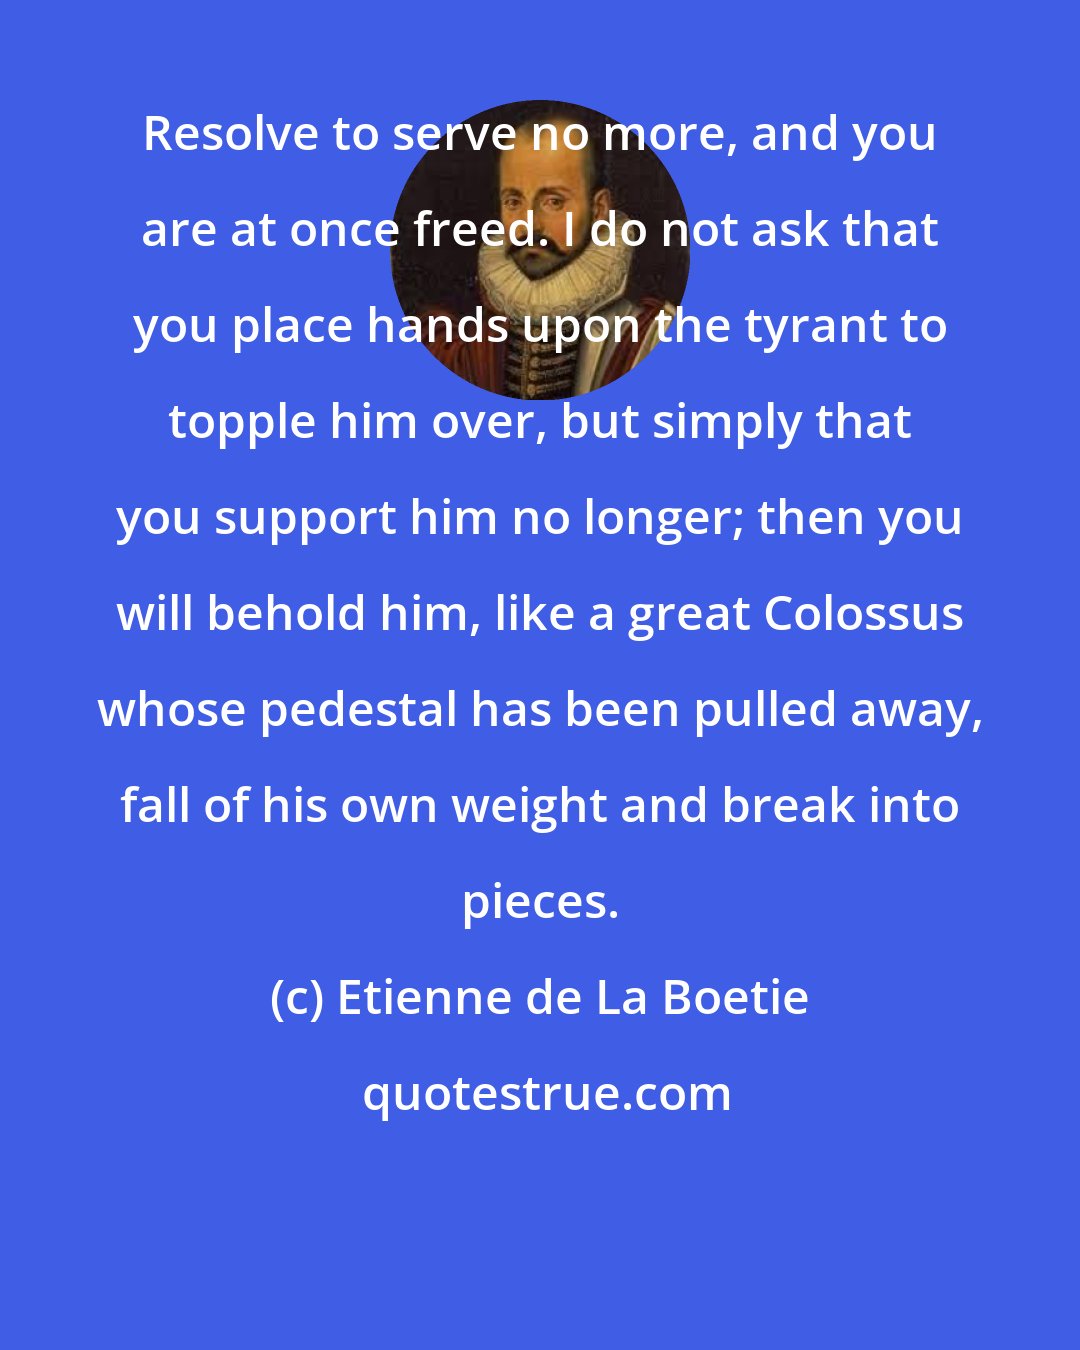 Etienne de La Boetie: Resolve to serve no more, and you are at once freed. I do not ask that you place hands upon the tyrant to topple him over, but simply that you support him no longer; then you will behold him, like a great Colossus whose pedestal has been pulled away, fall of his own weight and break into pieces.